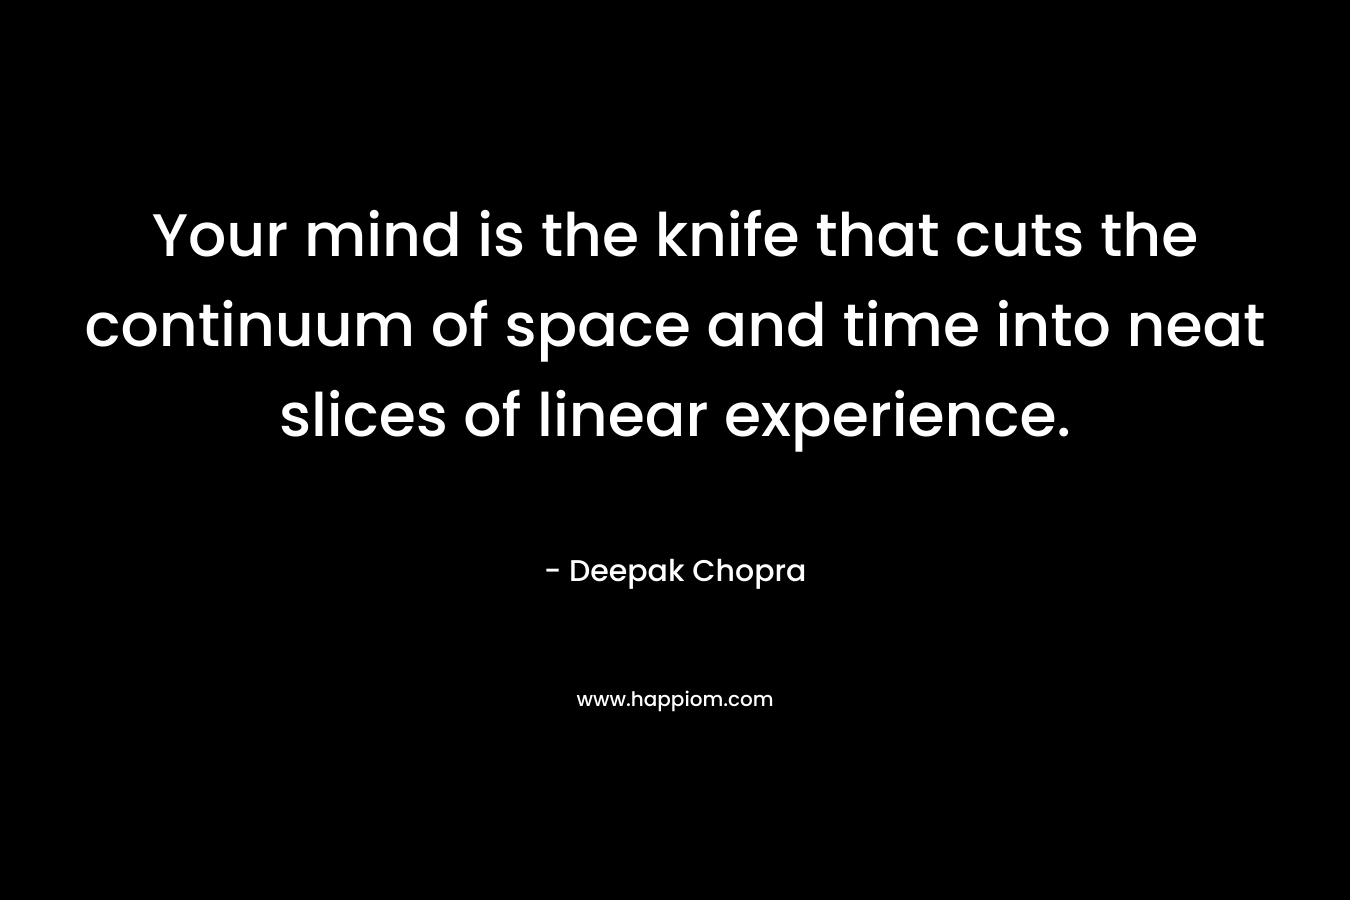 Your mind is the knife that cuts the continuum of space and time into neat slices of linear experience. – Deepak Chopra